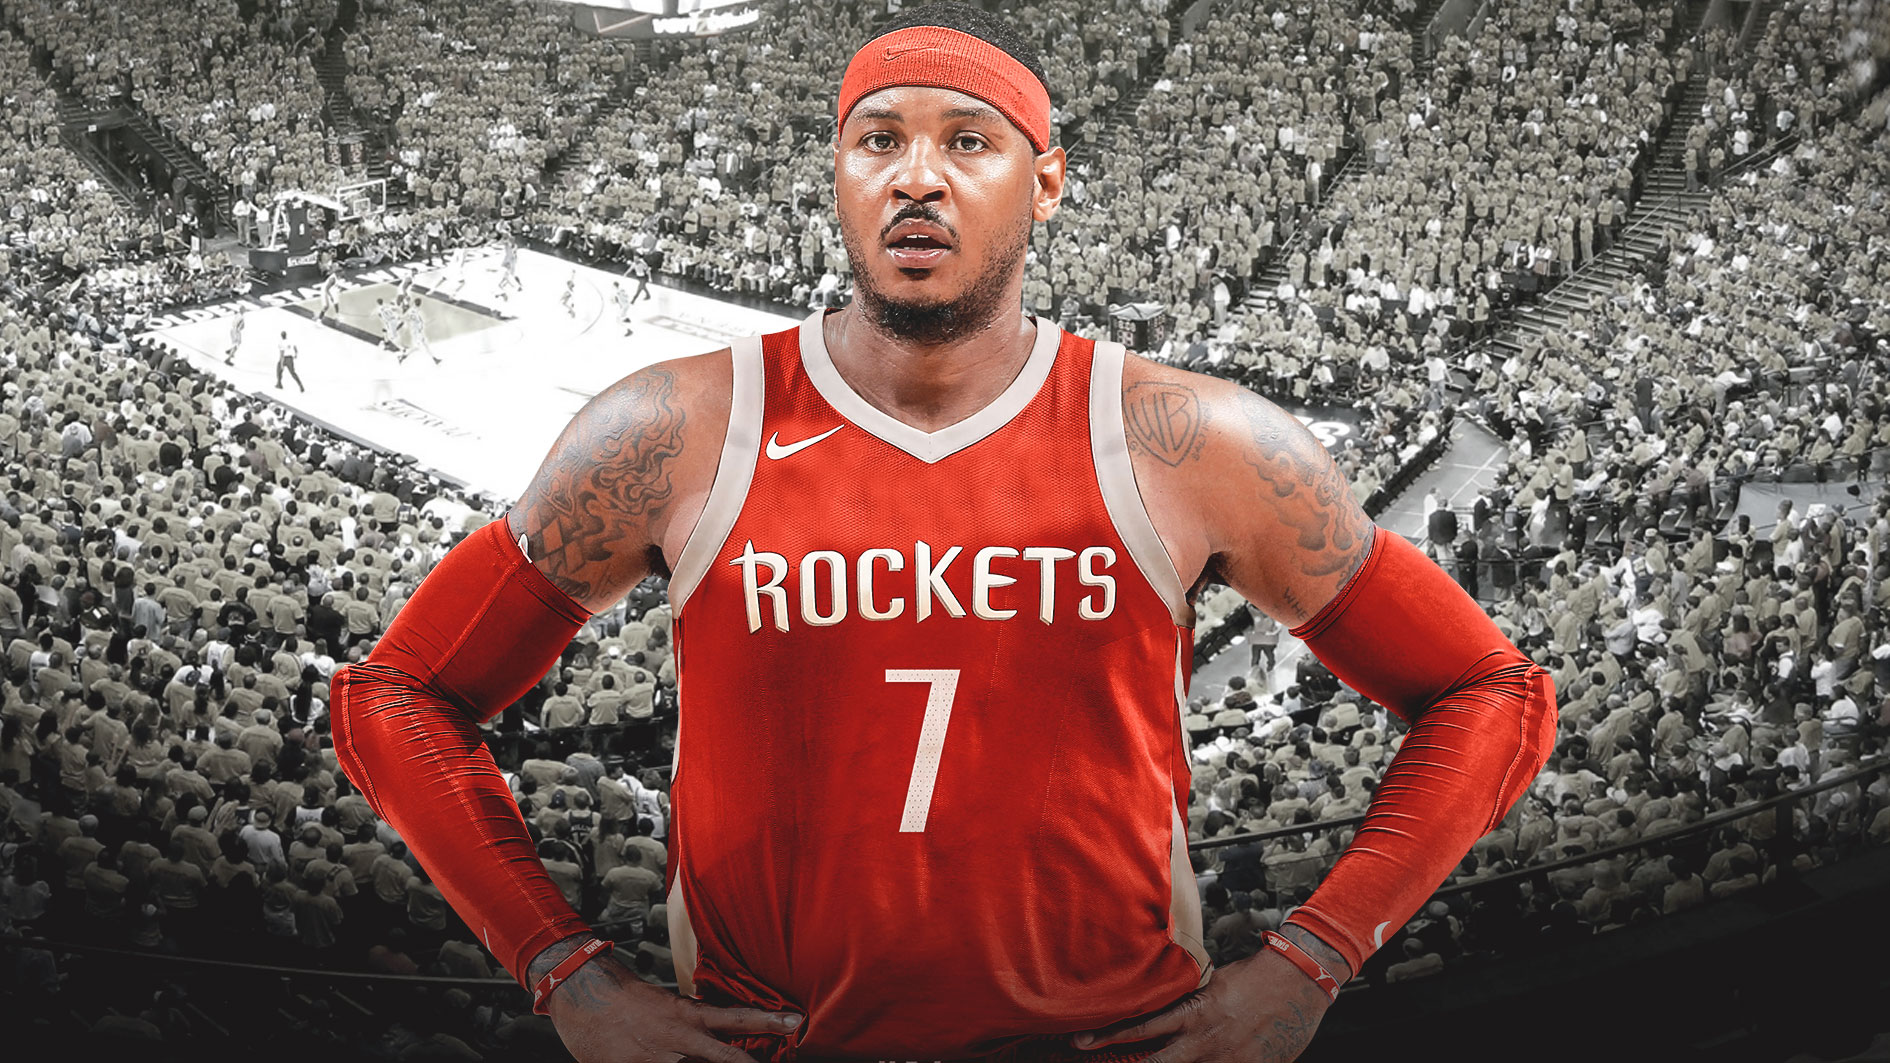 Rockets, Carmelo Anthony, Grizzlies